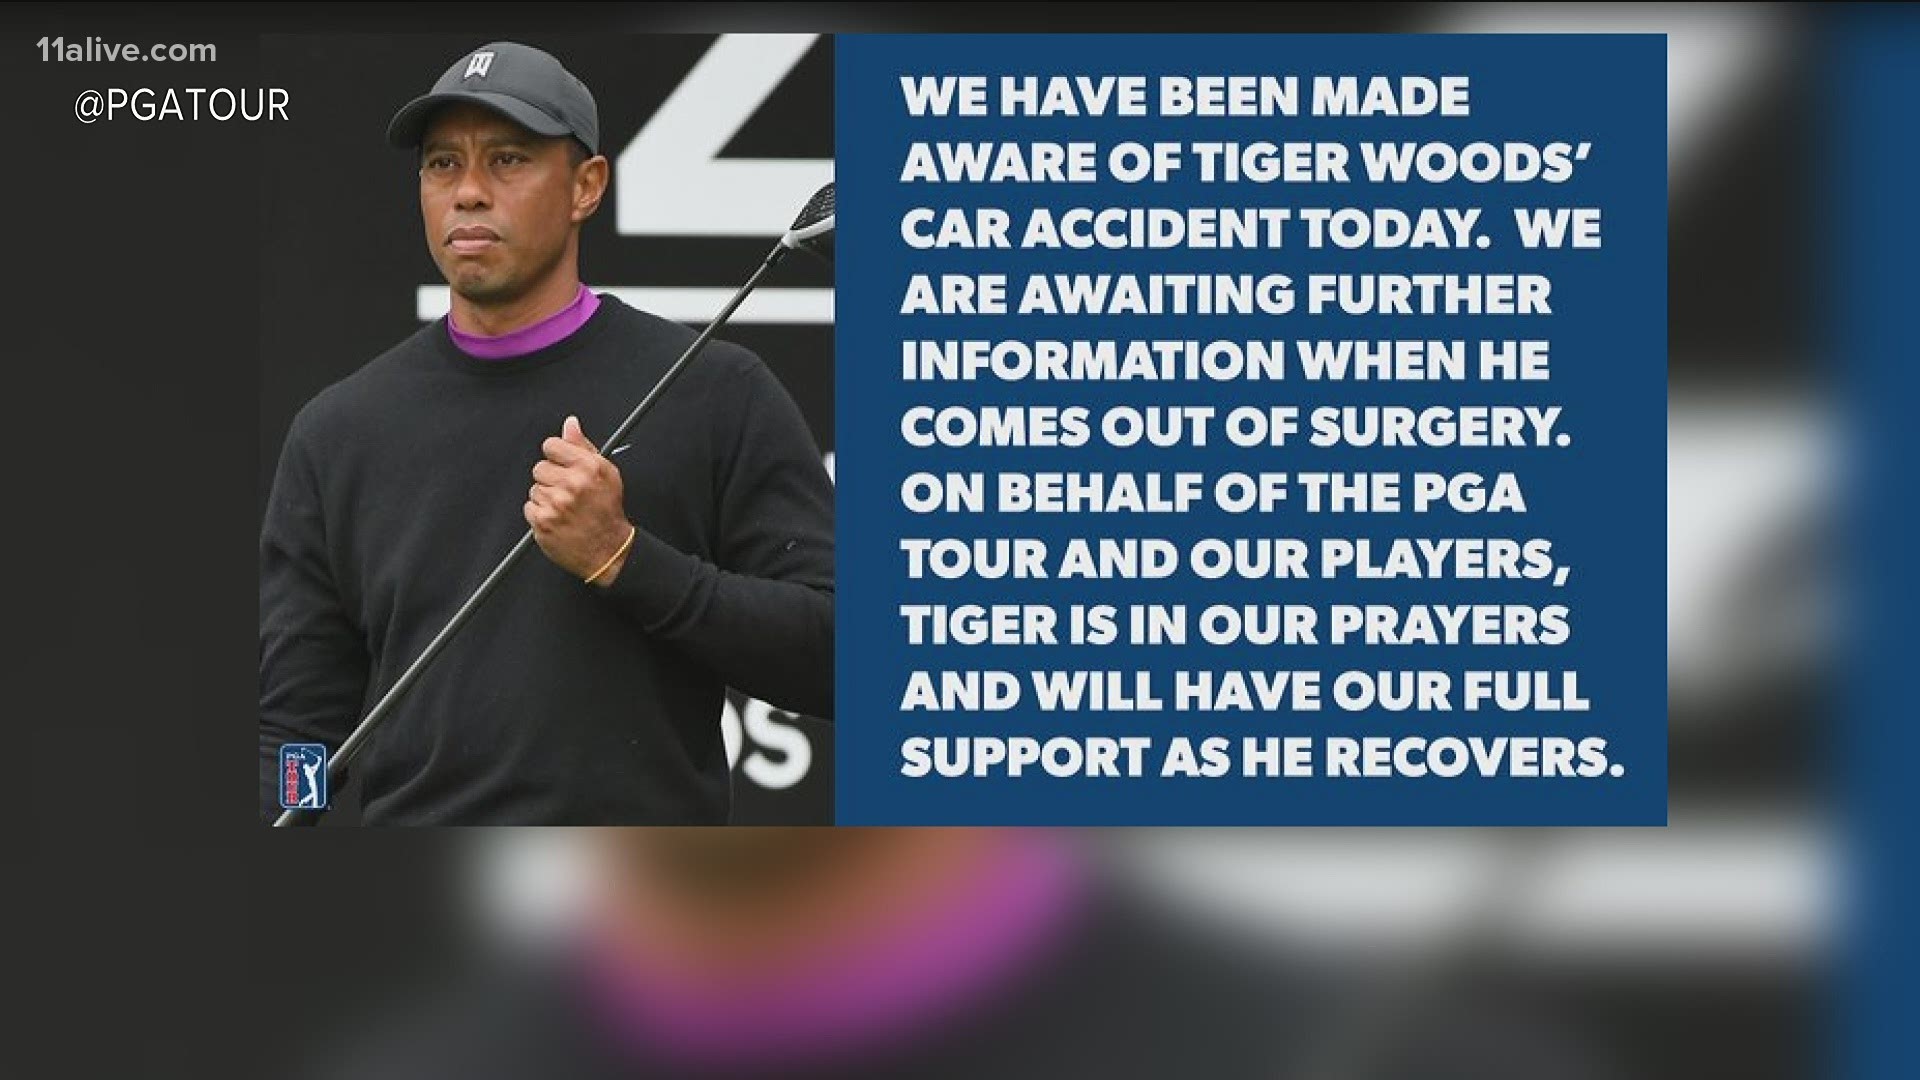 The golf legend had to be taken to surgery.